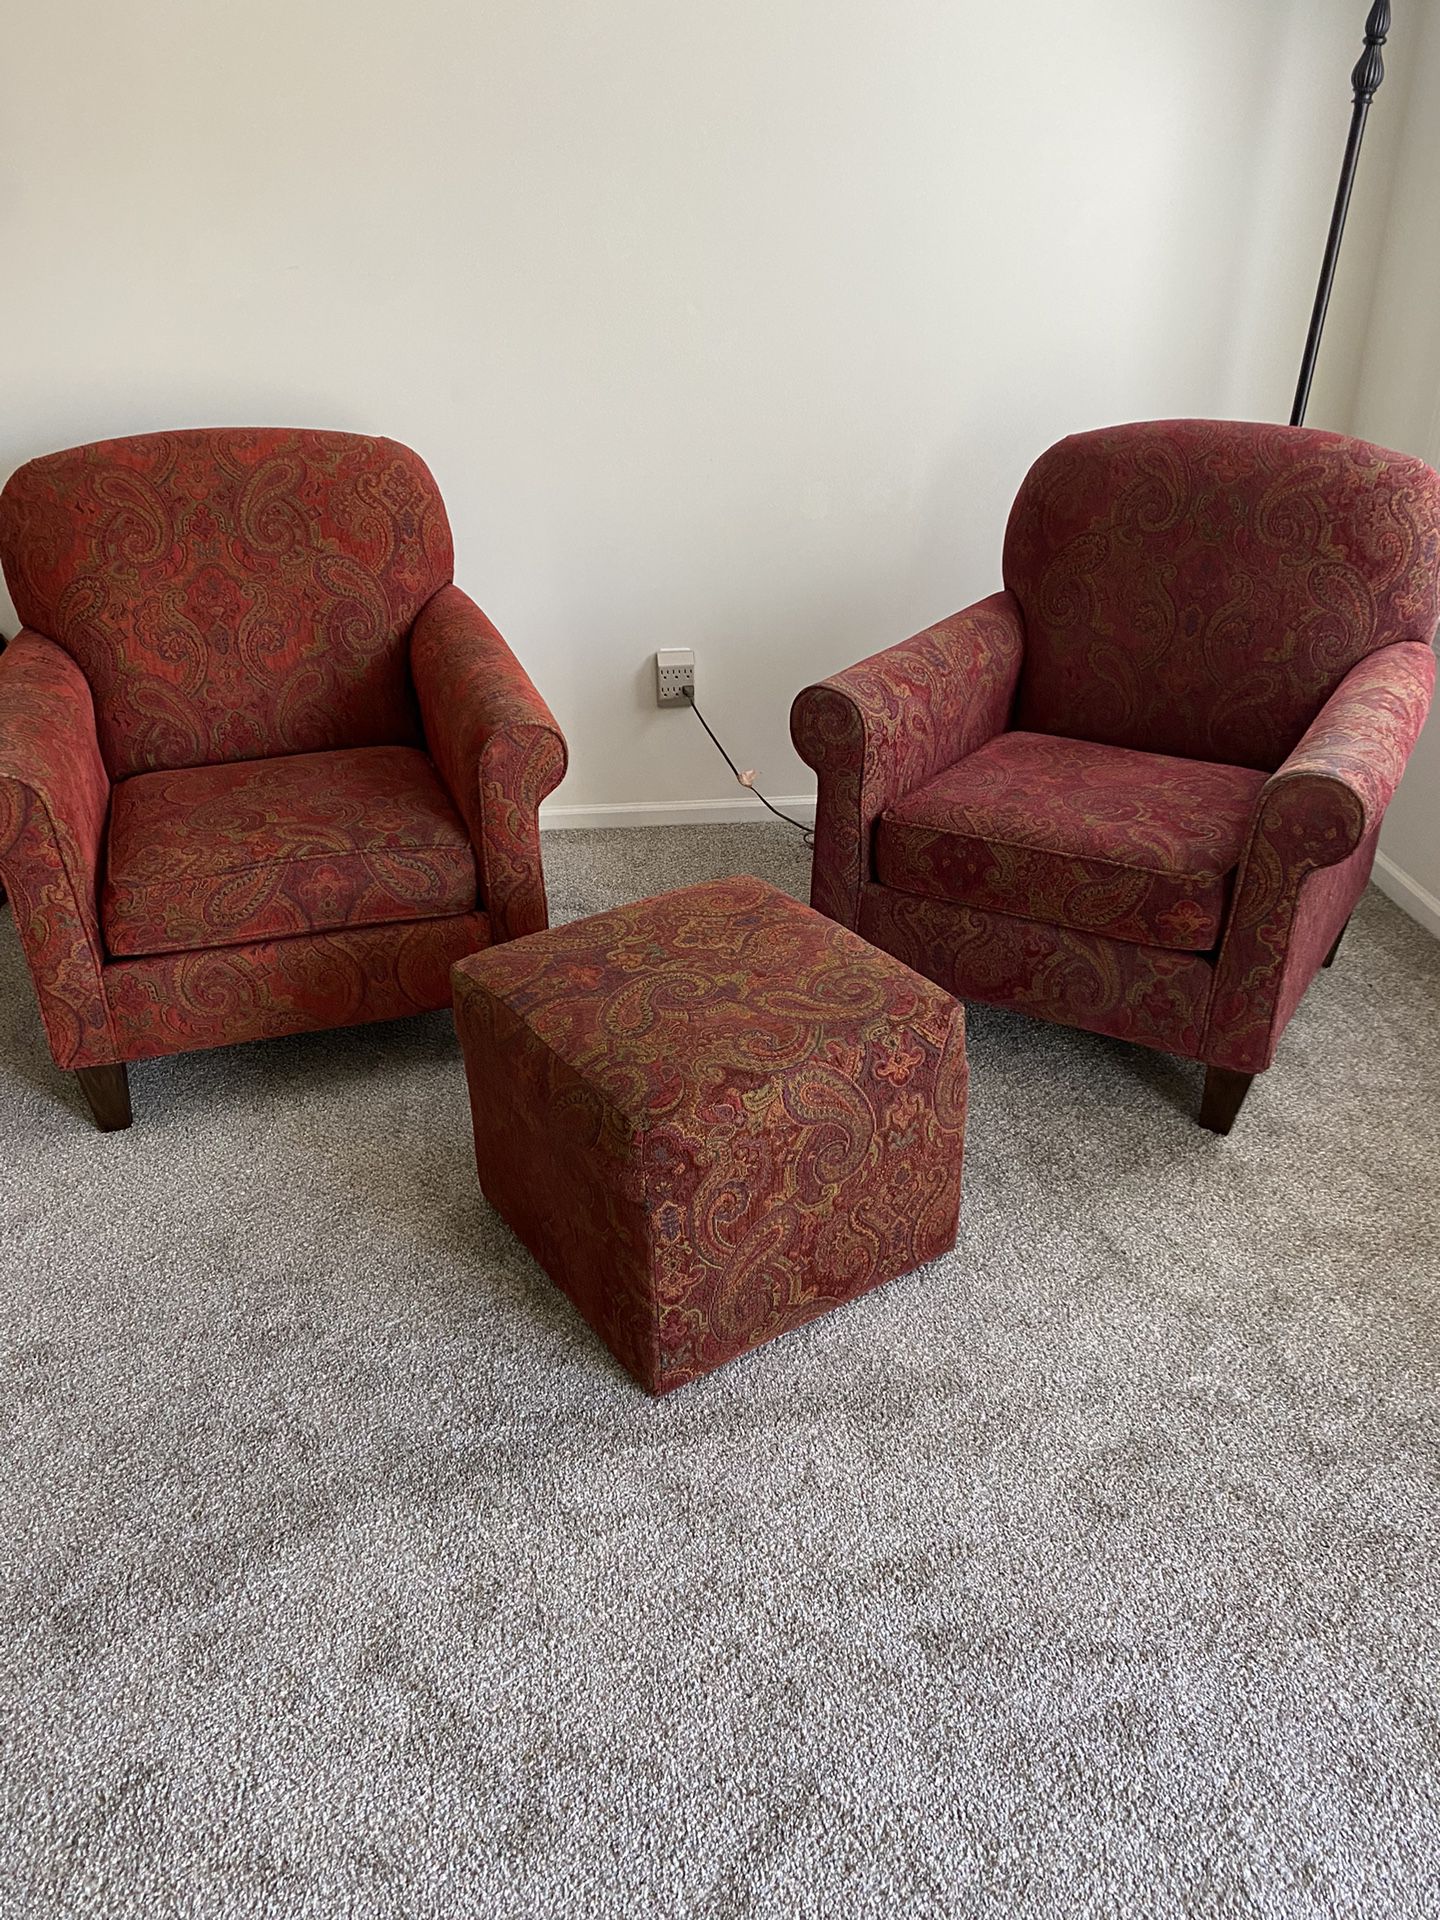 Armchairs and Ottoman For Sale!